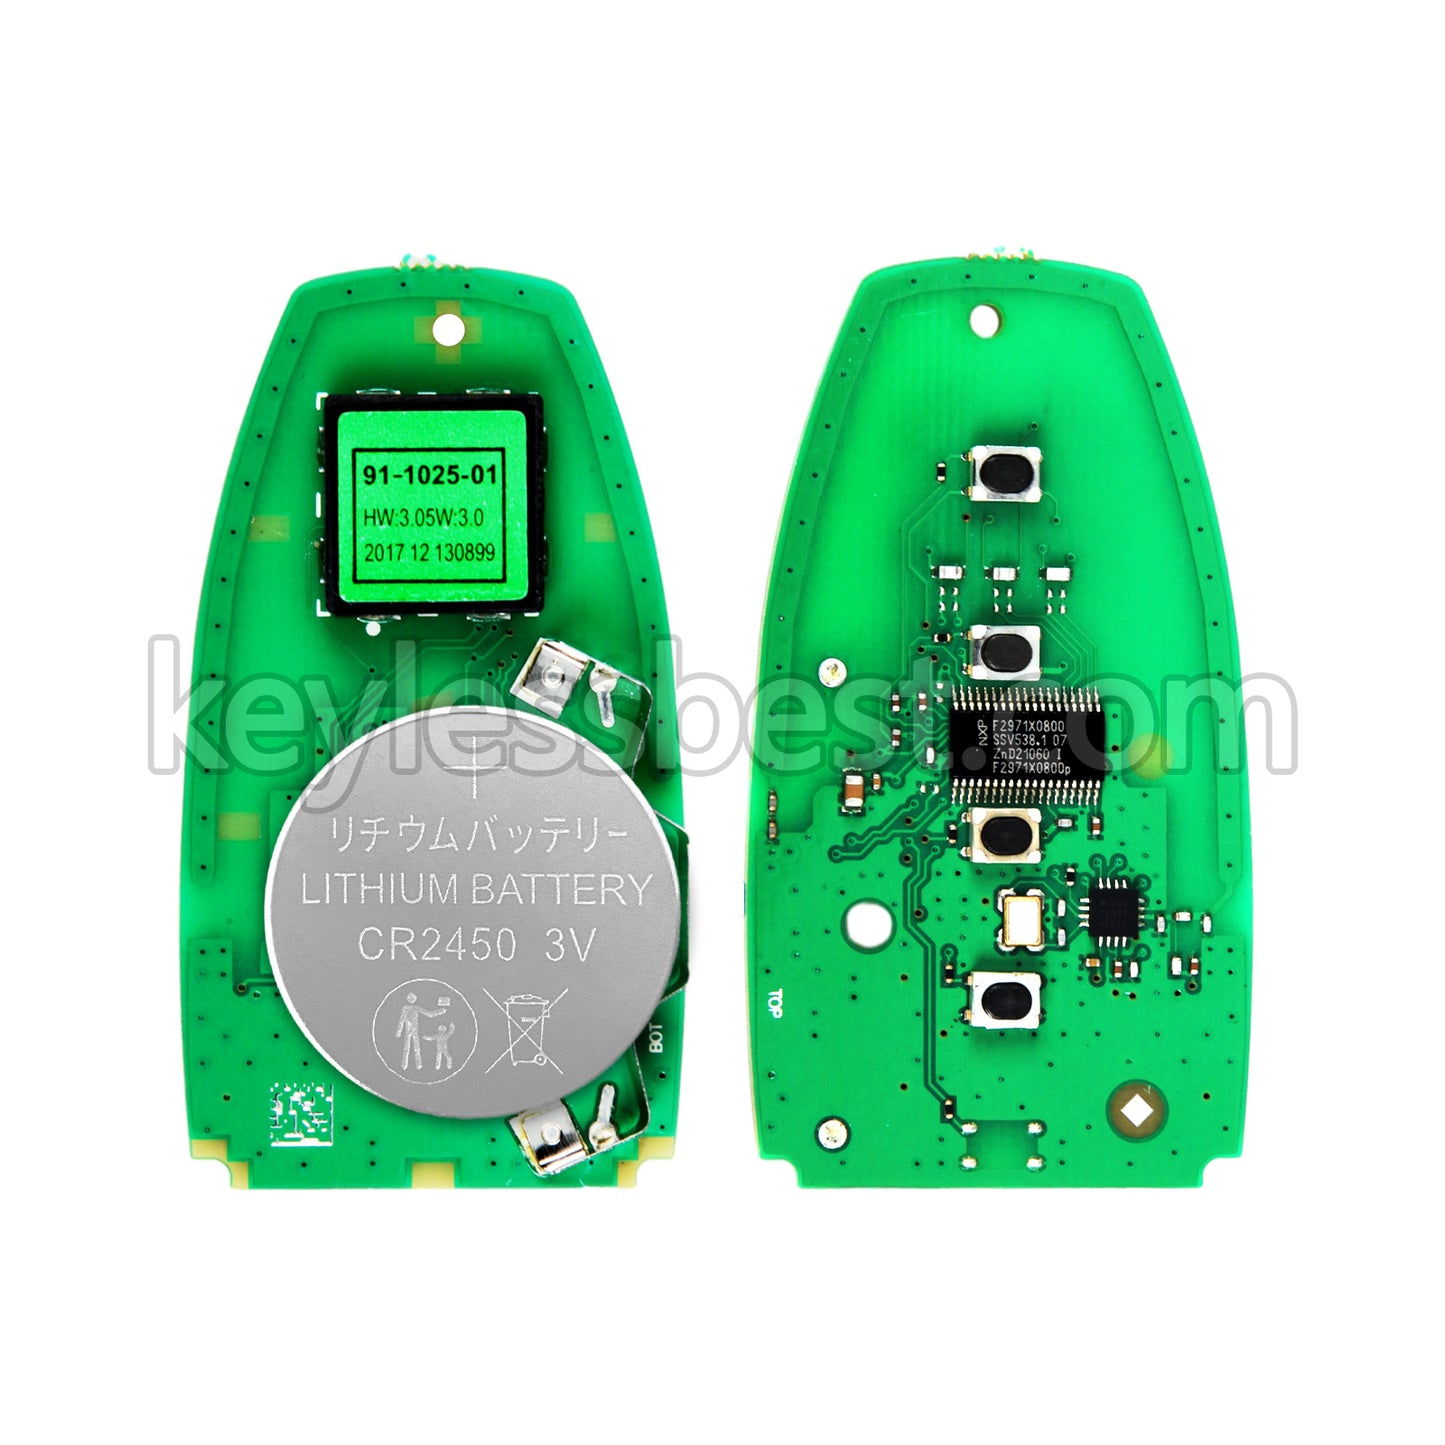 2023-2024 Ford Mustang / 4 Buttons Remote Key / M3N-A3C108397/ 434MHz